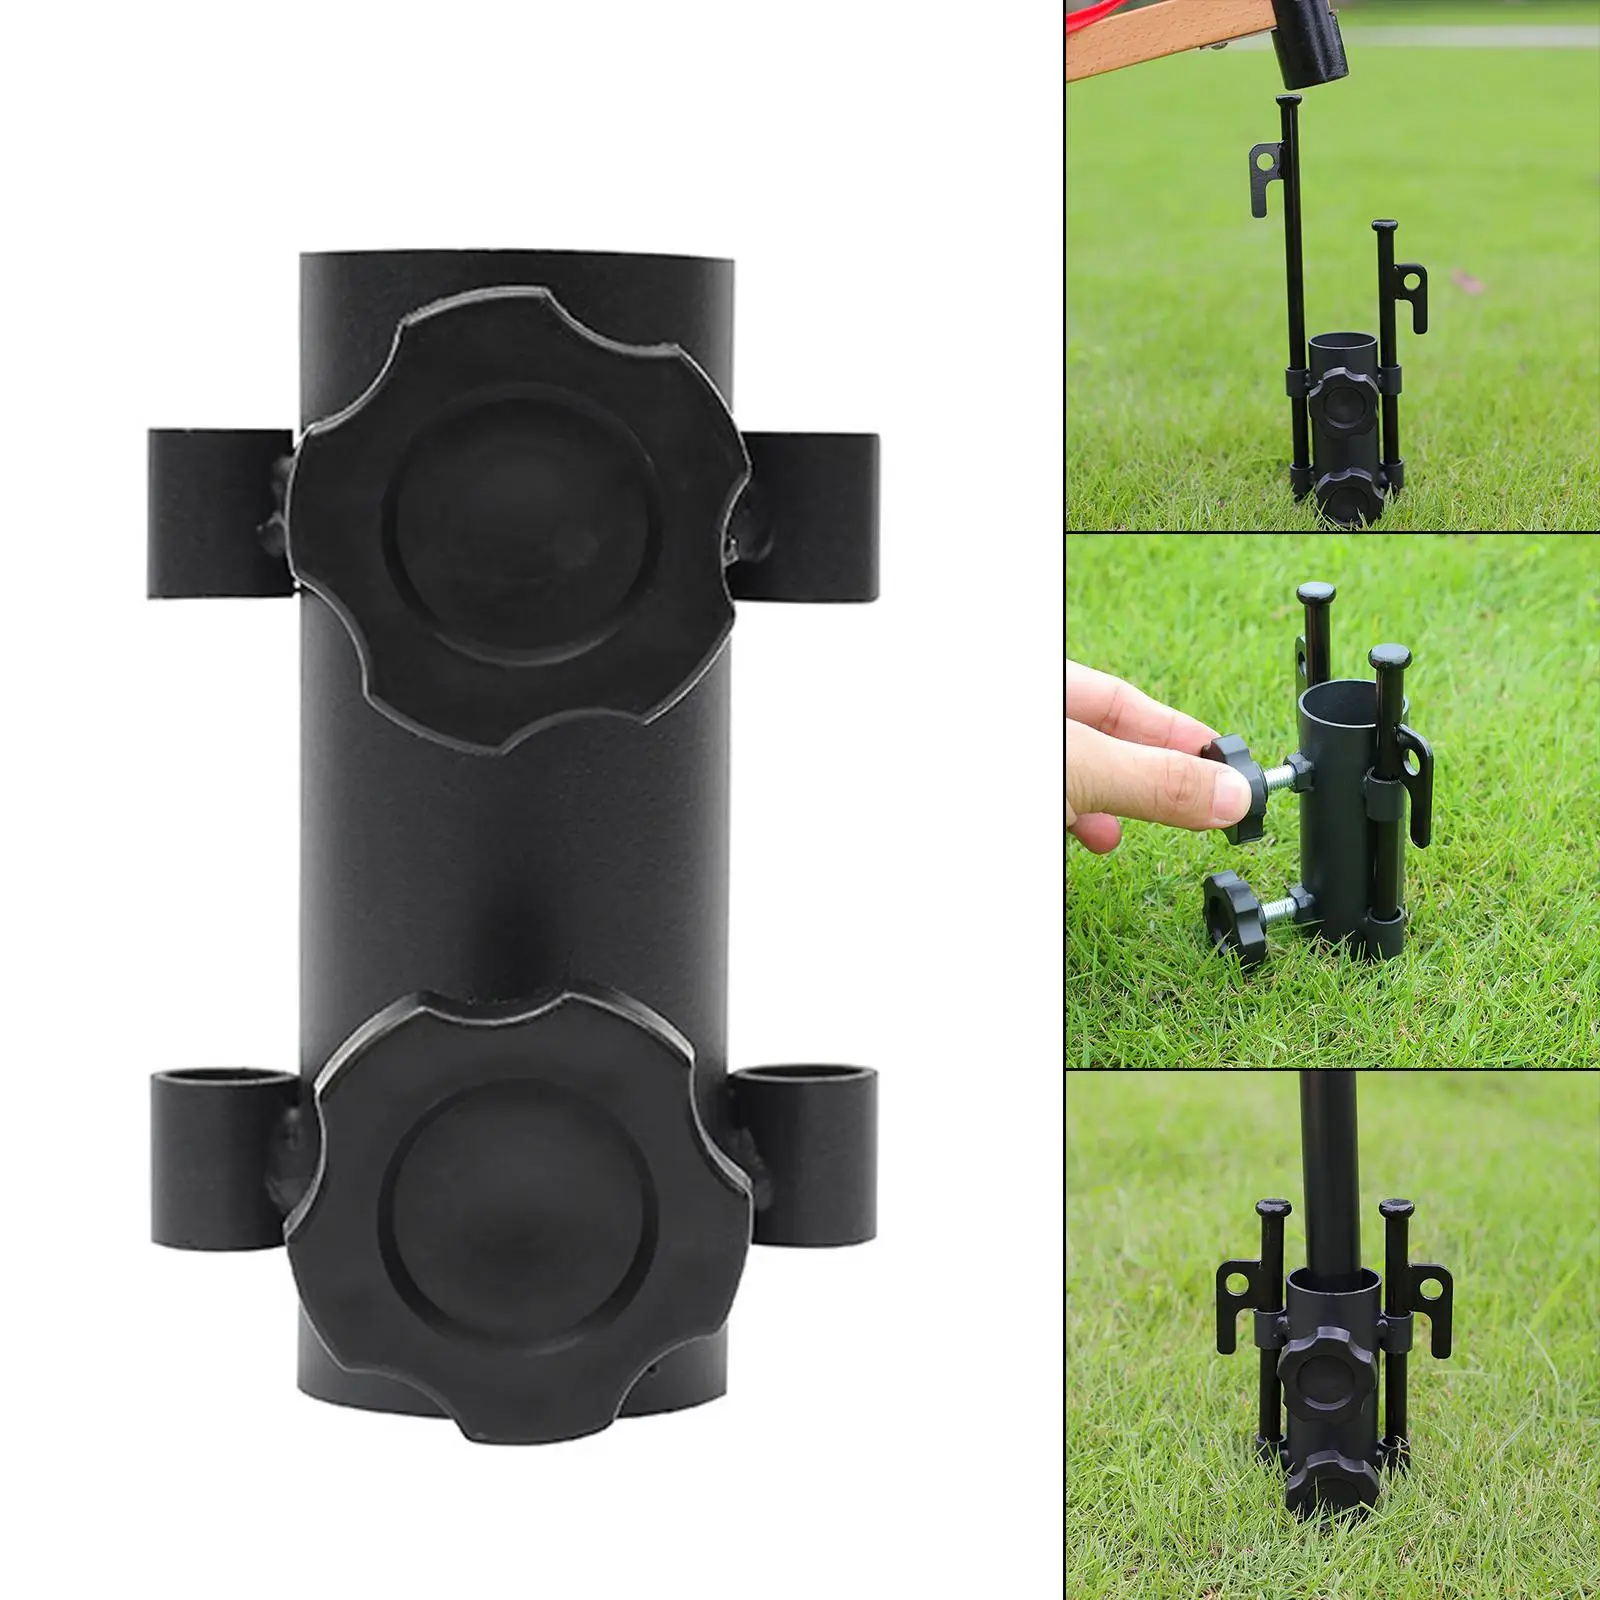 Awning Rod Holder Reinforced Canopy Poles Stand for BBQ Traveling Outdoor